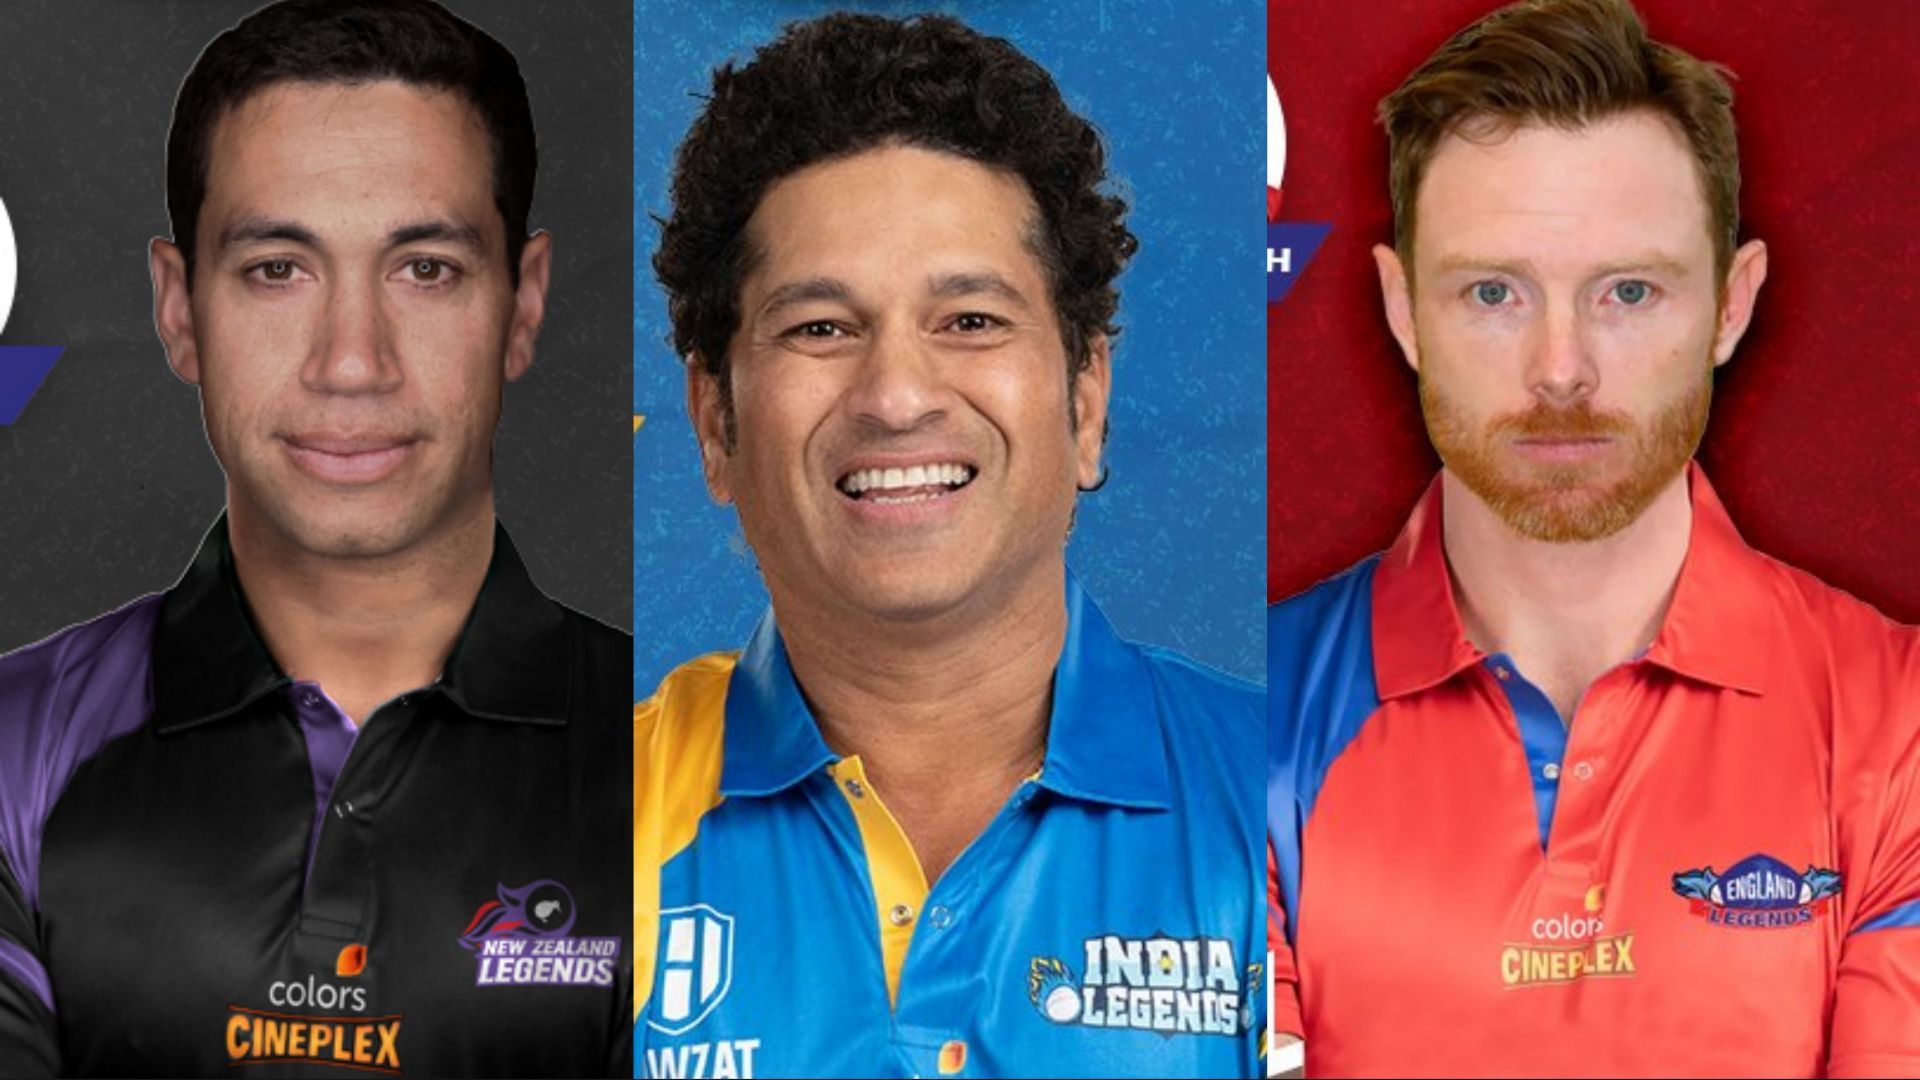 Ross Taylor, Sachin Tendulkar and Ian Bell will be in action in Road Safety World Series 2022 (Image: Twitter)